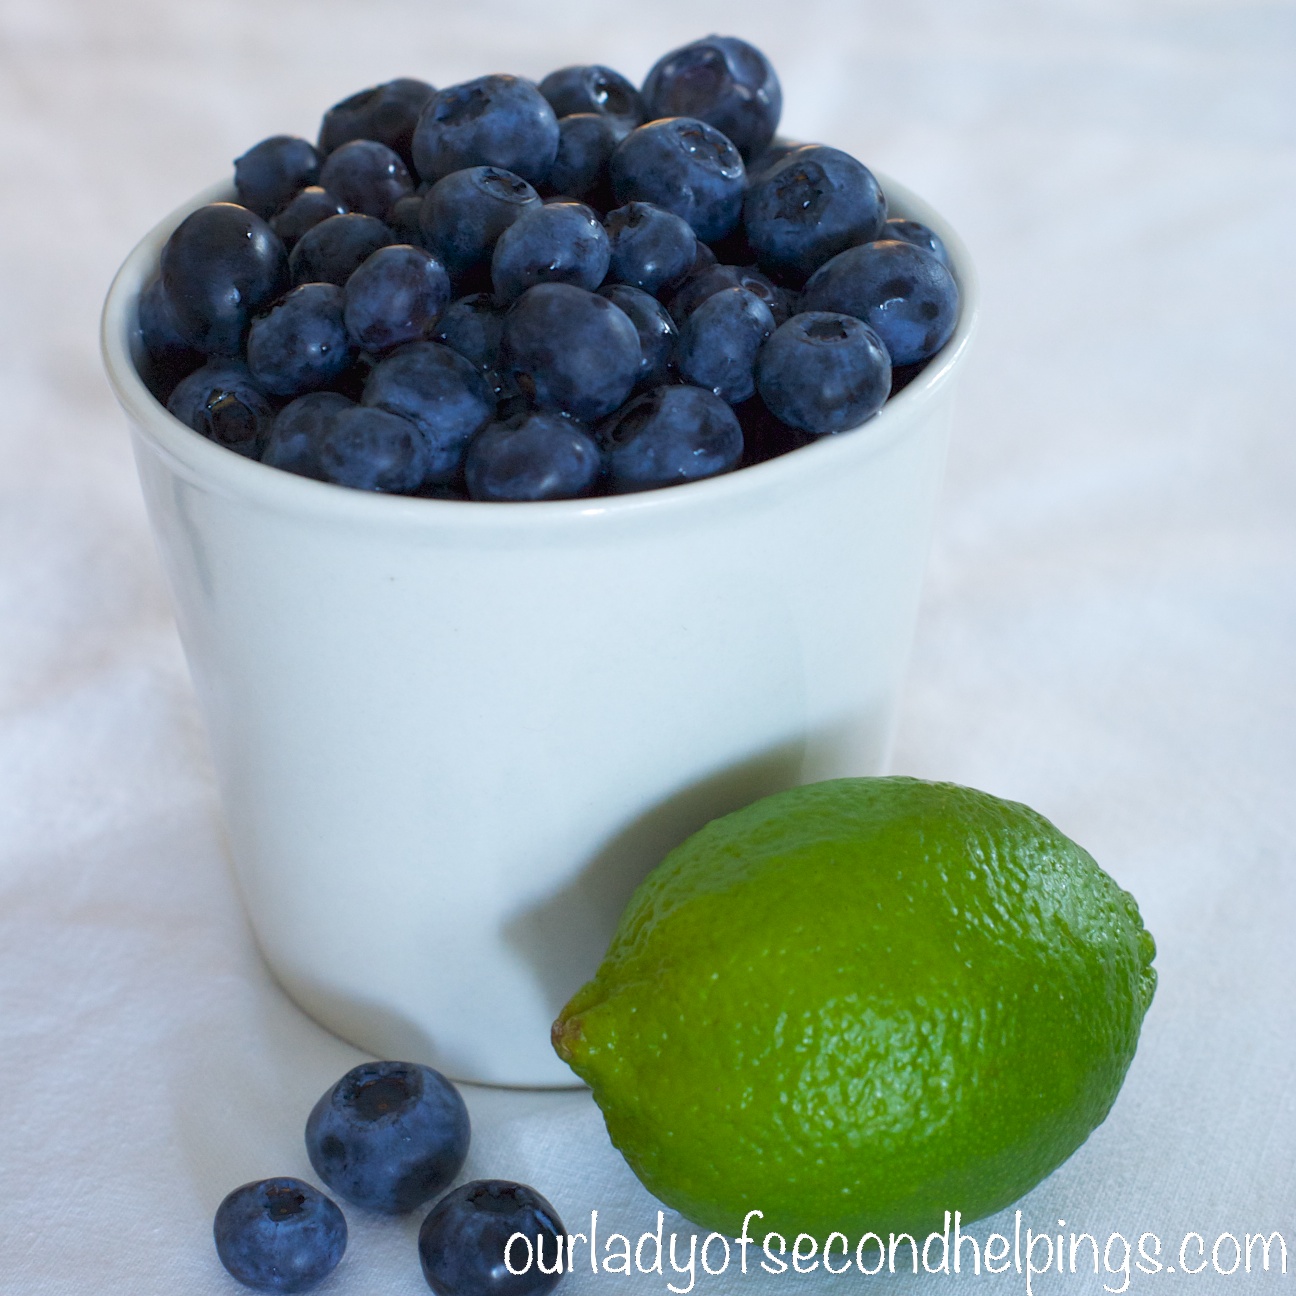 Cup of blueberries and a lime